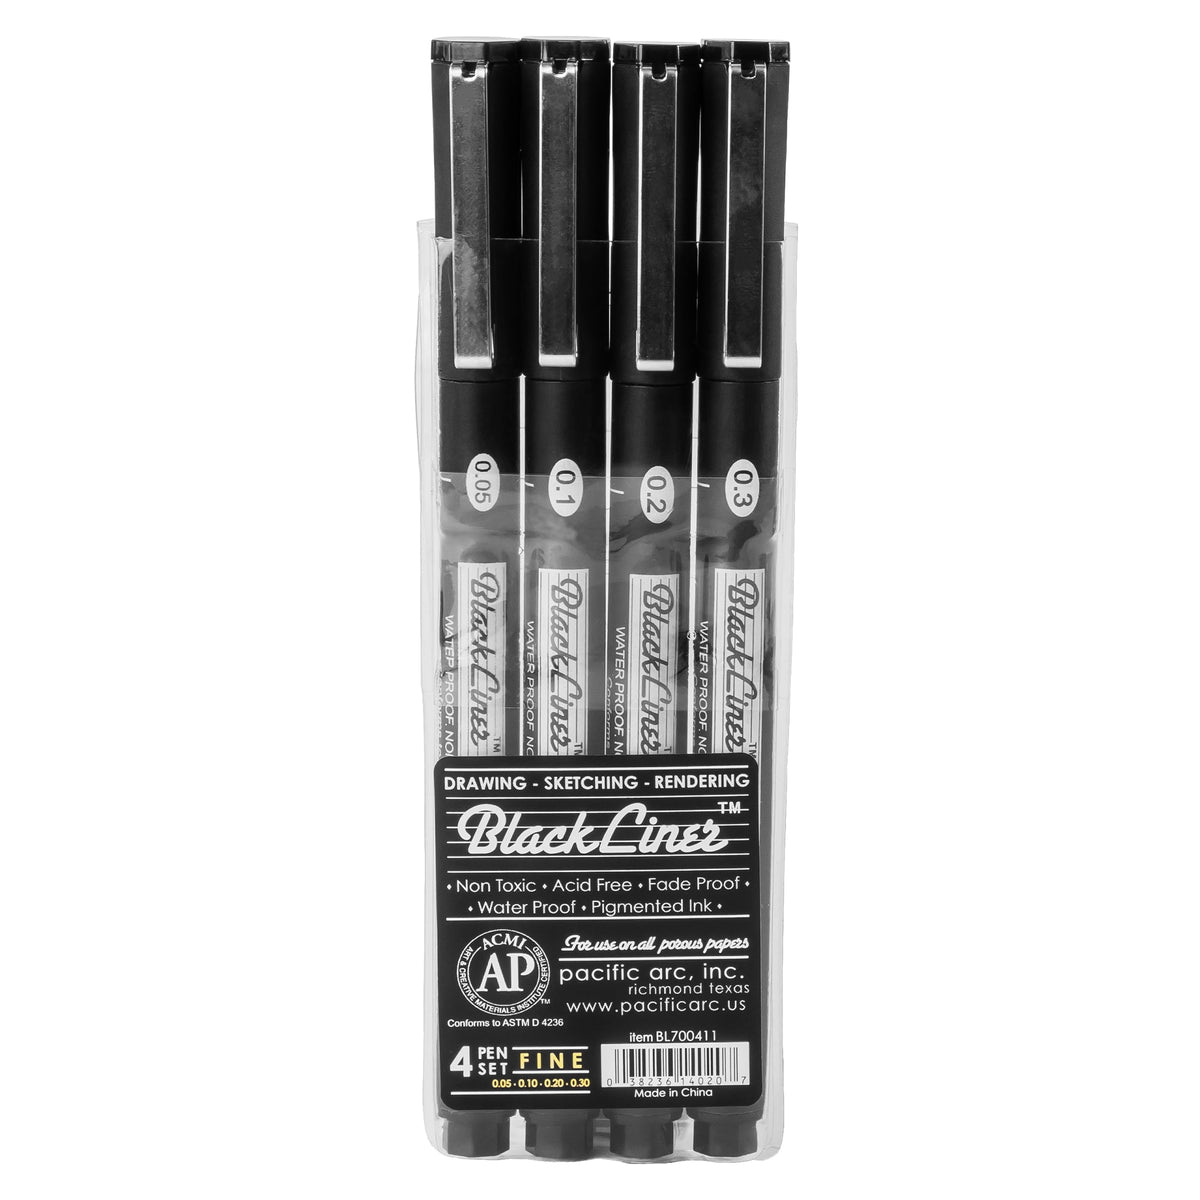 Pacific Arc Artist Vine Charcoal, Soft, Black 4 Charcoal Sticks for  Drawing, Sketching, and Fine Art